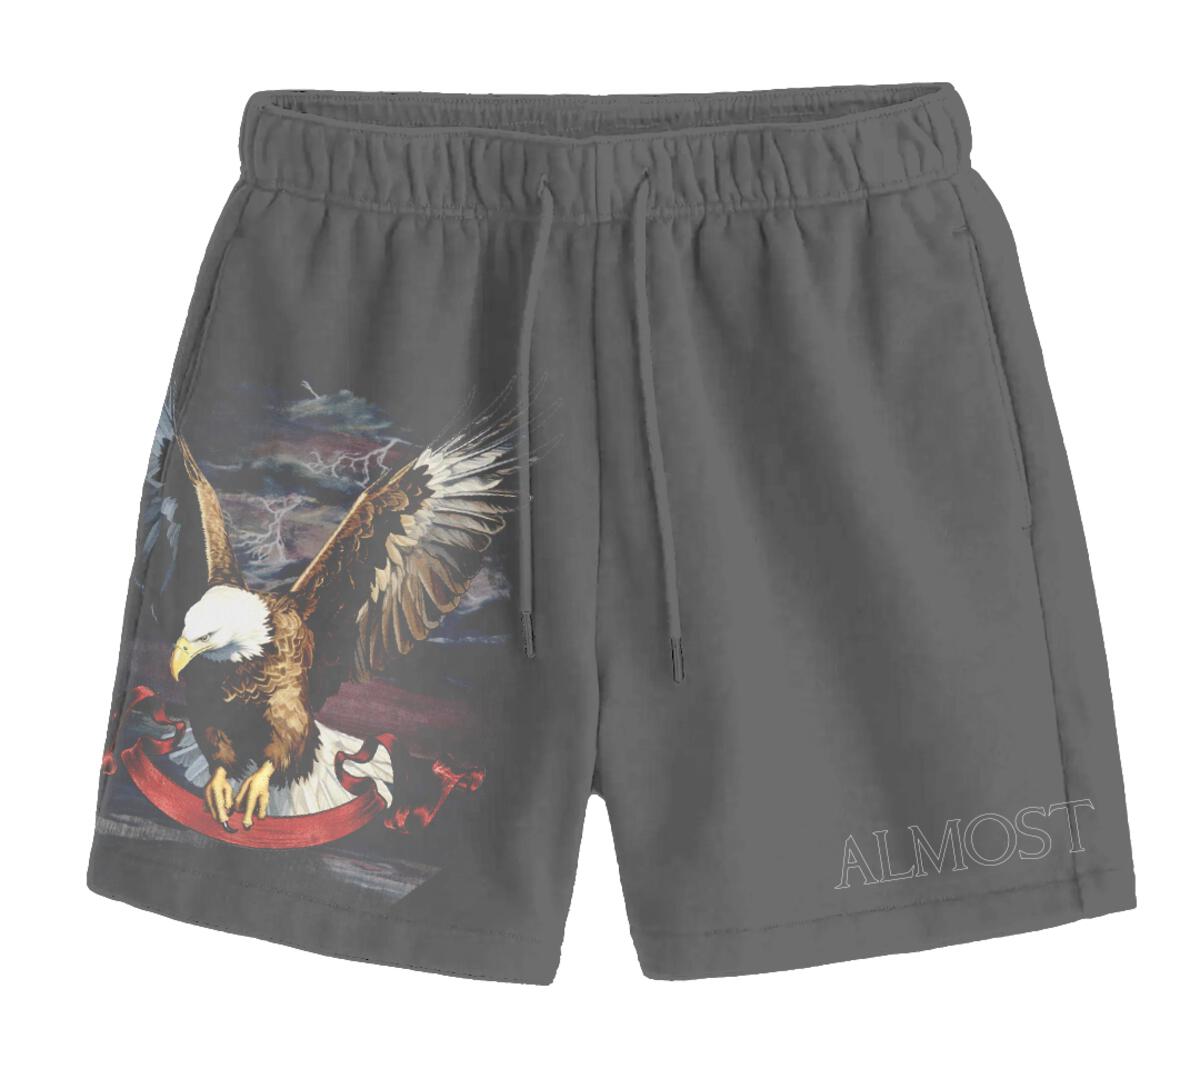 Almost Someday "PRIVILEGE TERRY SHORTS"